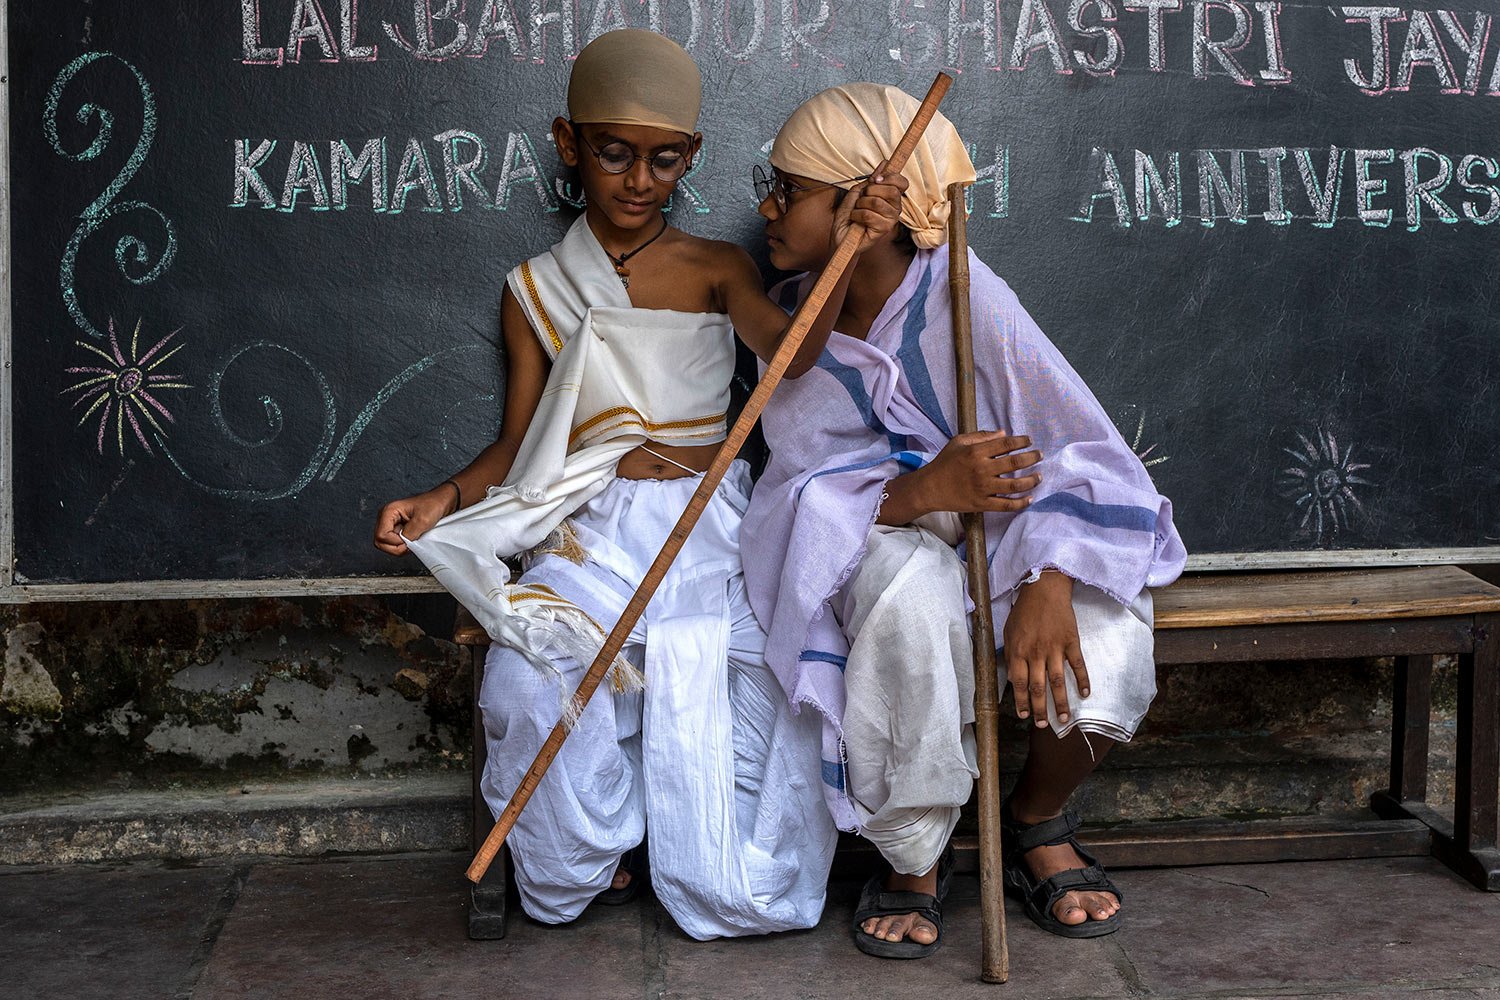  School children dressed as iconic independence leader Mahatma Gandhi sit on a bench after taking part in an event to mark his birth anniversary in Mumbai, India, Sunday, Oct. 2, 2022. (AP Photo/Rafiq Maqbool) 